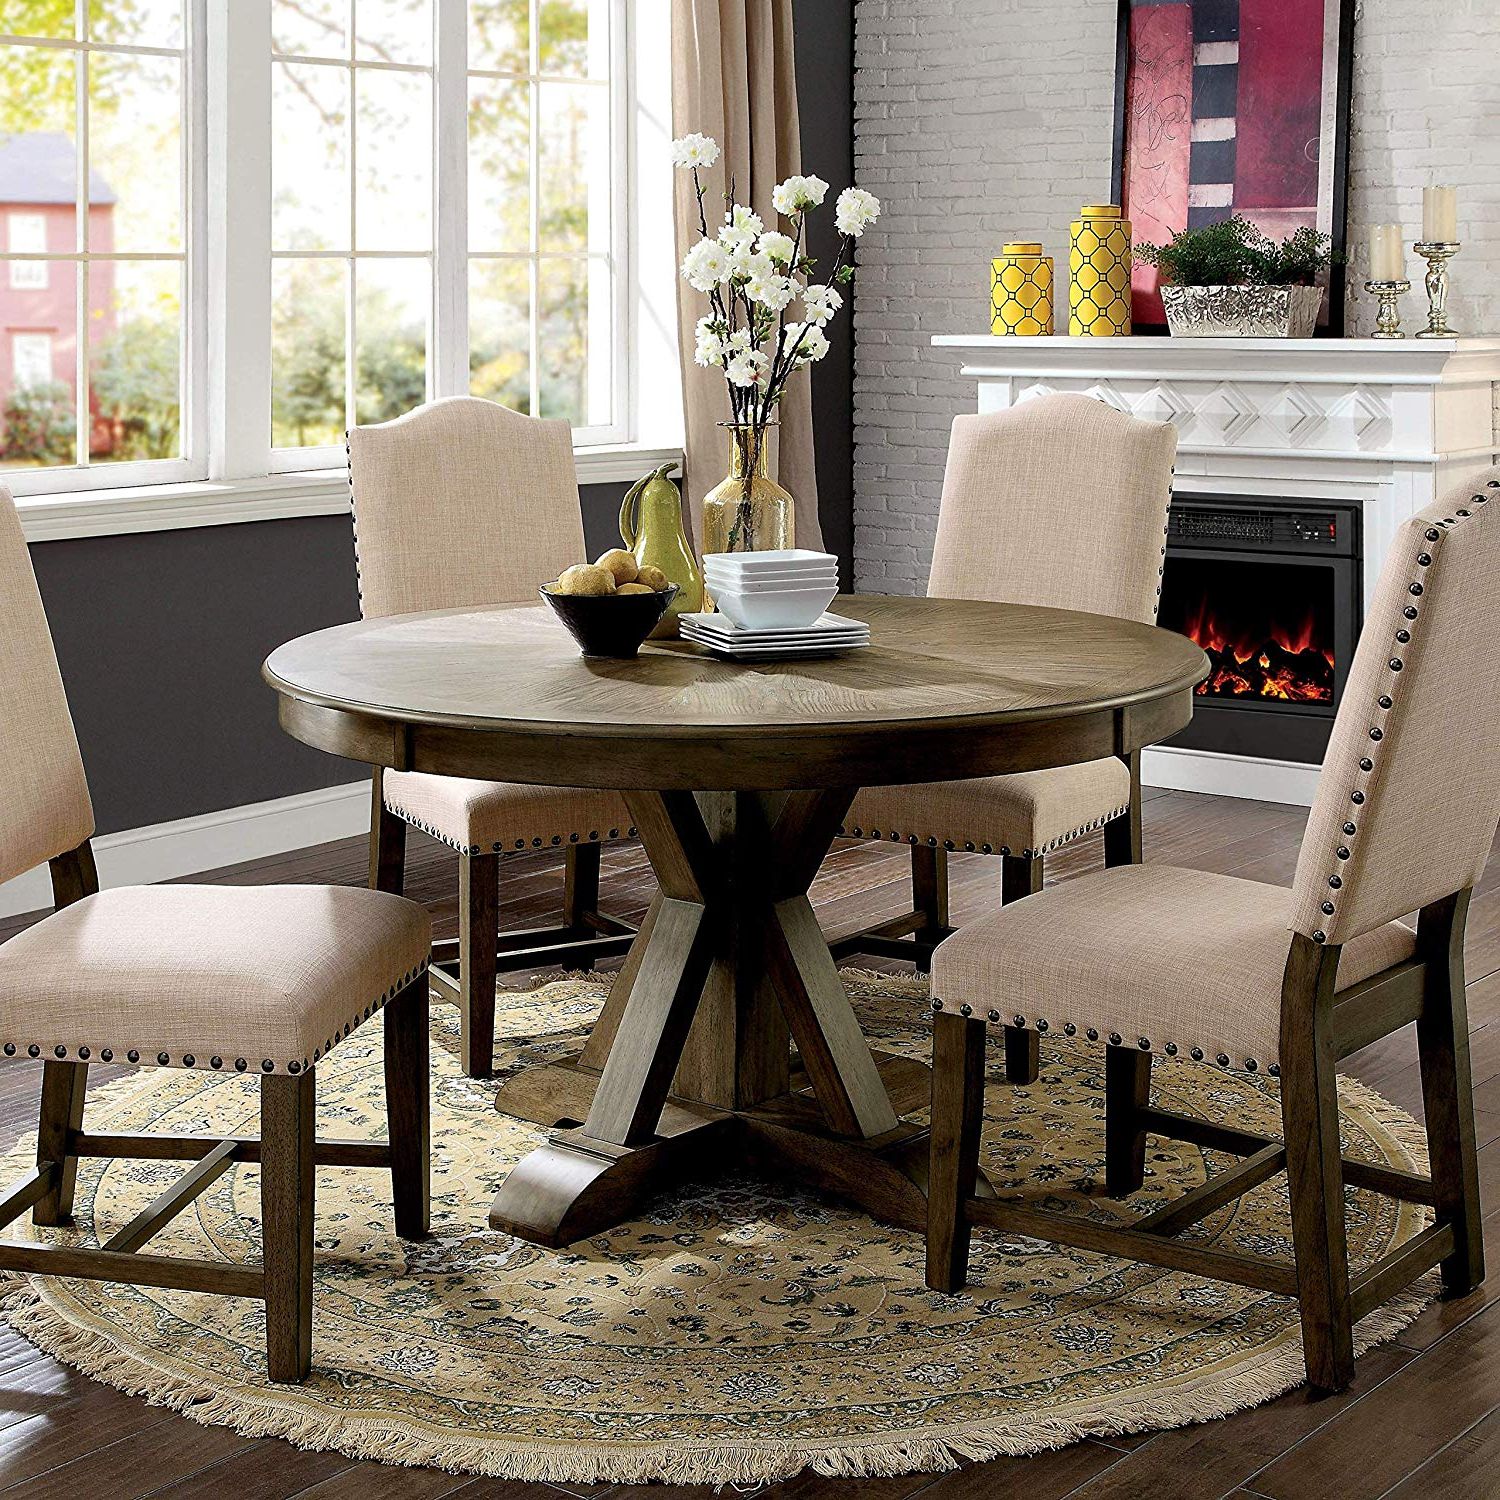 Favorite Transitional 4 Seating Double Drop Leaf Casual Dining Tables Regarding Amazon: Rustic Light Oak Round 54 Inch Pedestal Dining (Photo 8 of 30)